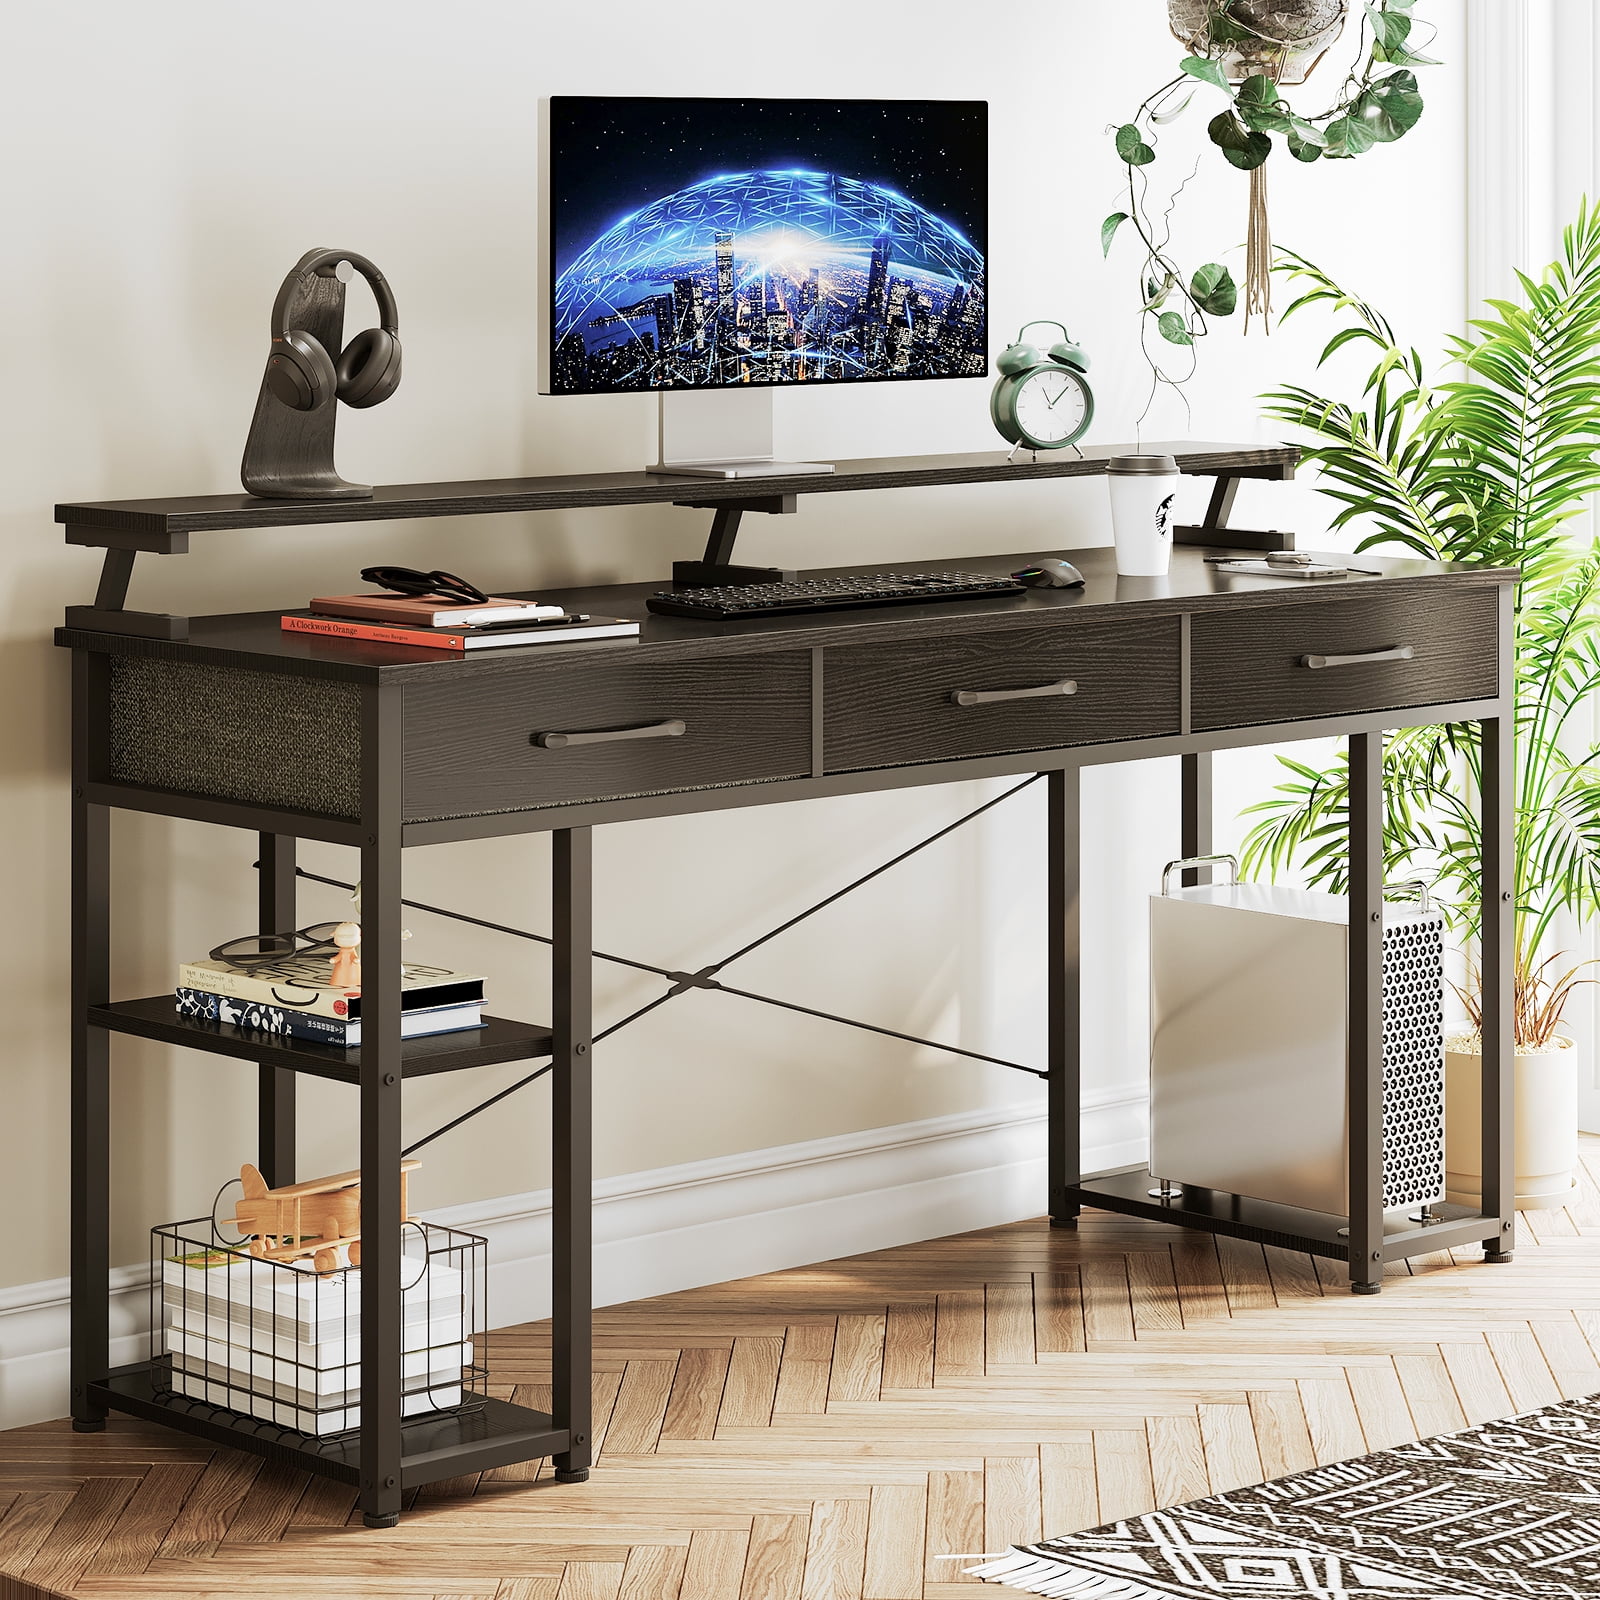 ODK 40 Inch Small Computer Desk with 3 Fabric Drawers, Home Office Desks  with Storage, Modern Work Desk for Bedroom, Writing Study Table, Black